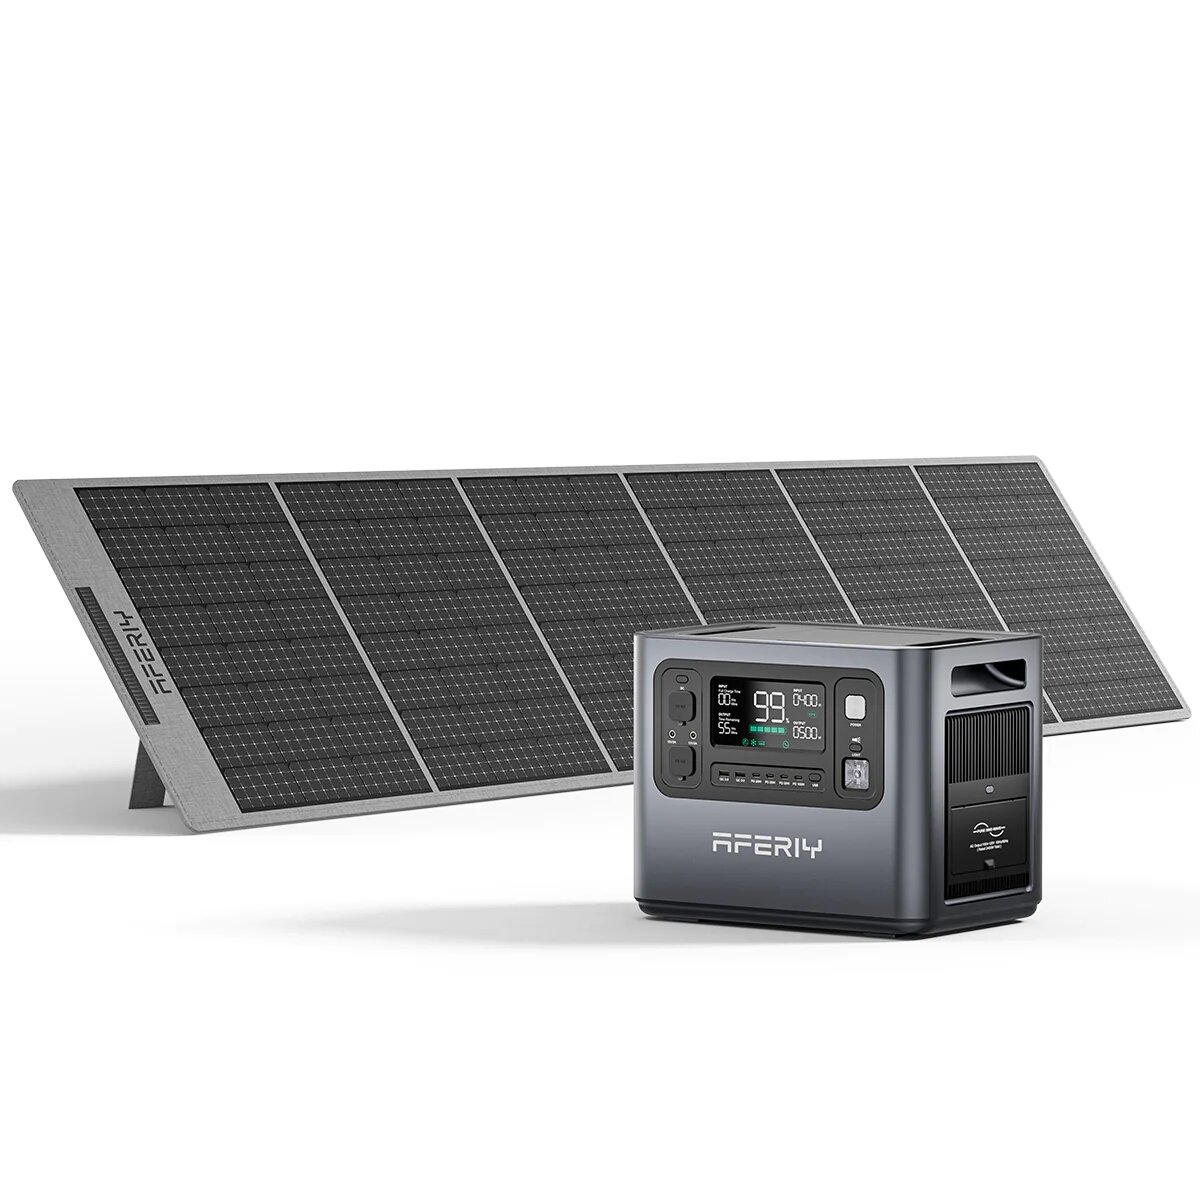 best price,aferiy,p210,2400w,2048wh,power,station,s400,400w,solar,panel,discount